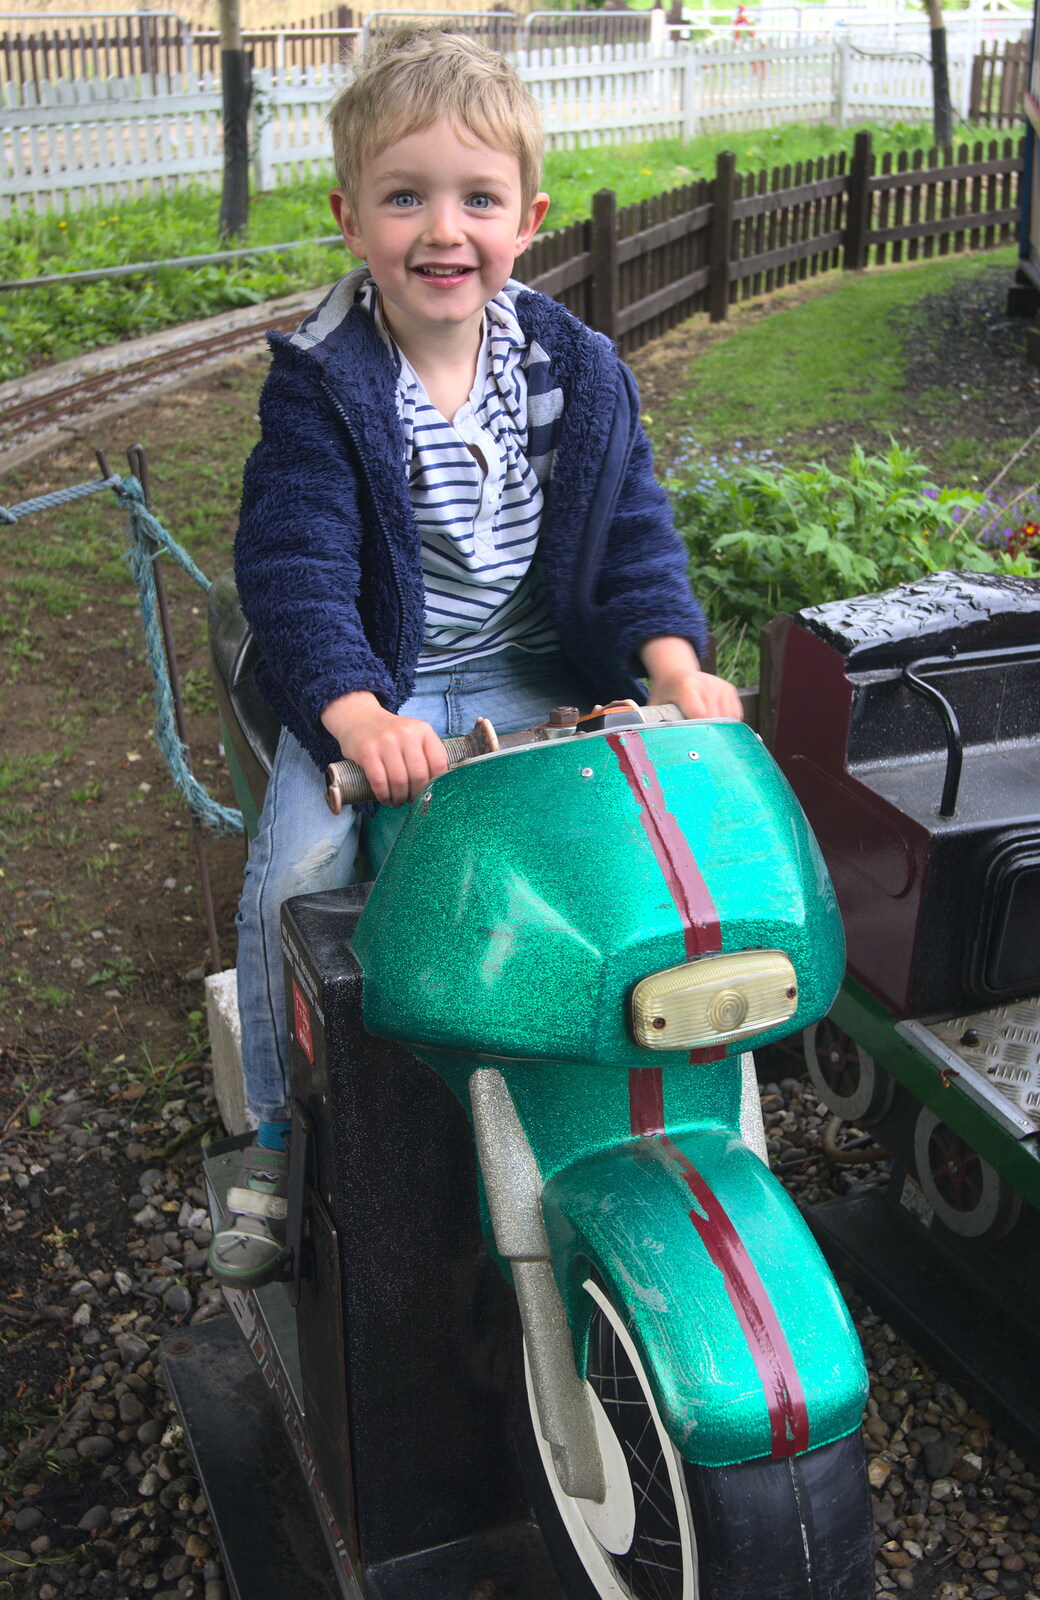 Fred's on a motorobike from A Day at Bressingham Steam and Gardens, Diss, Norfolk - 18th May 2013